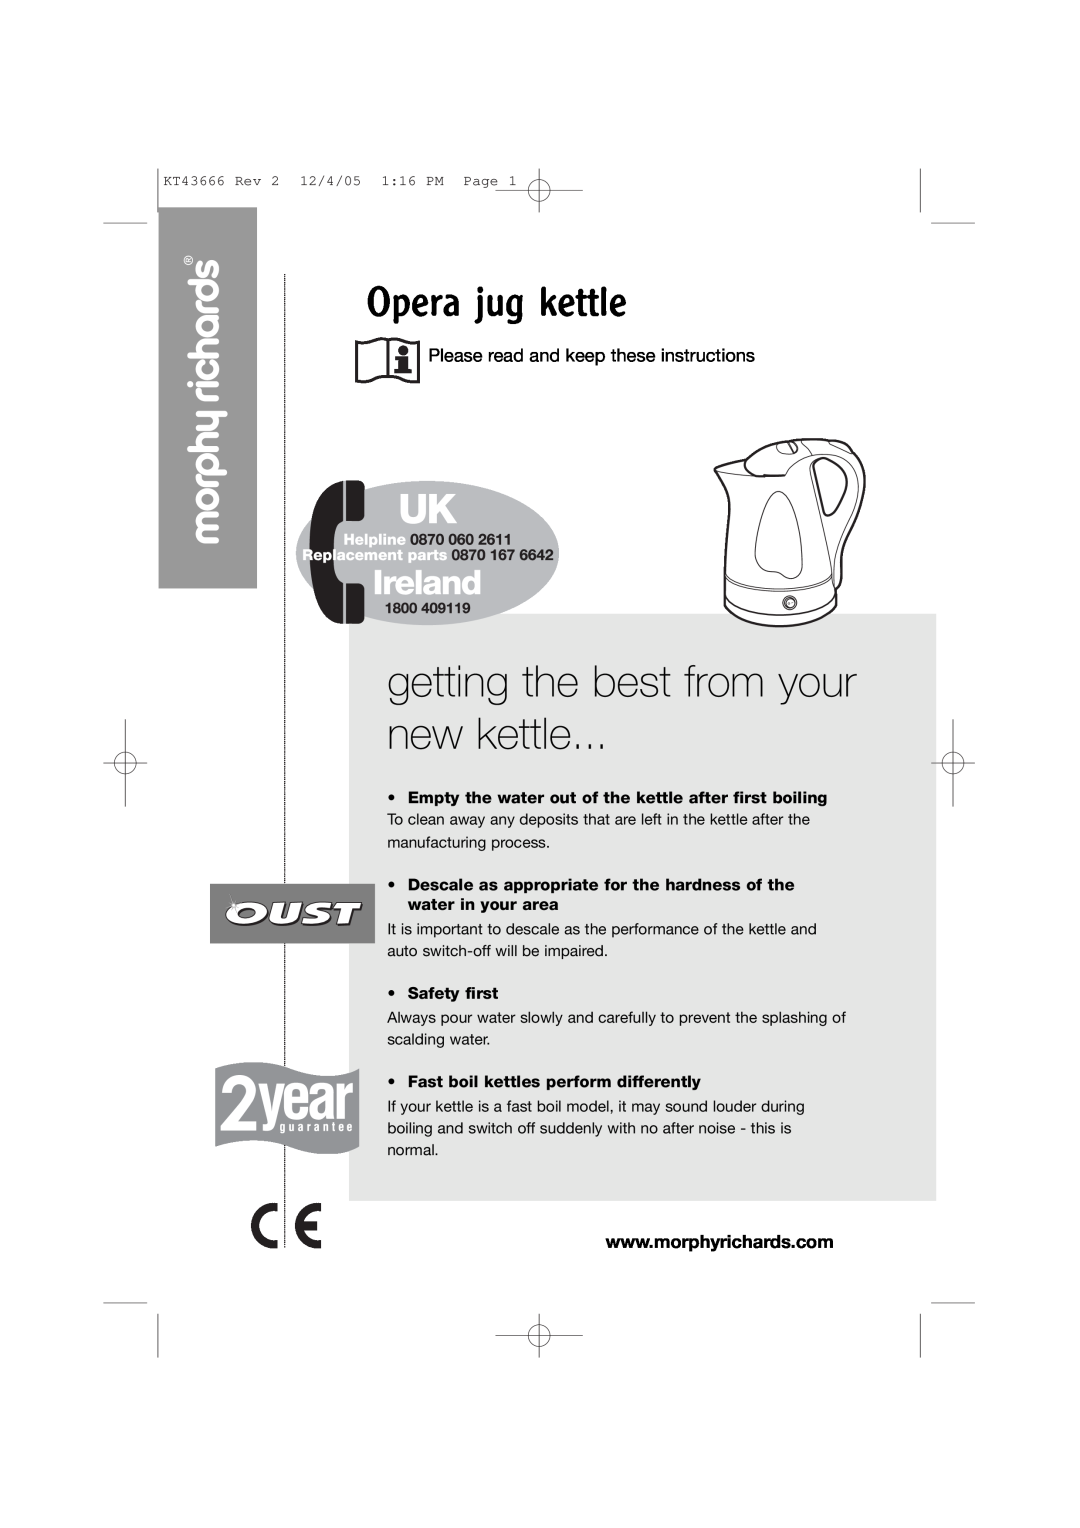 Morphy Richards Opera jug kettle manual getting the best from your new kettle, Please read and keep these instructions 